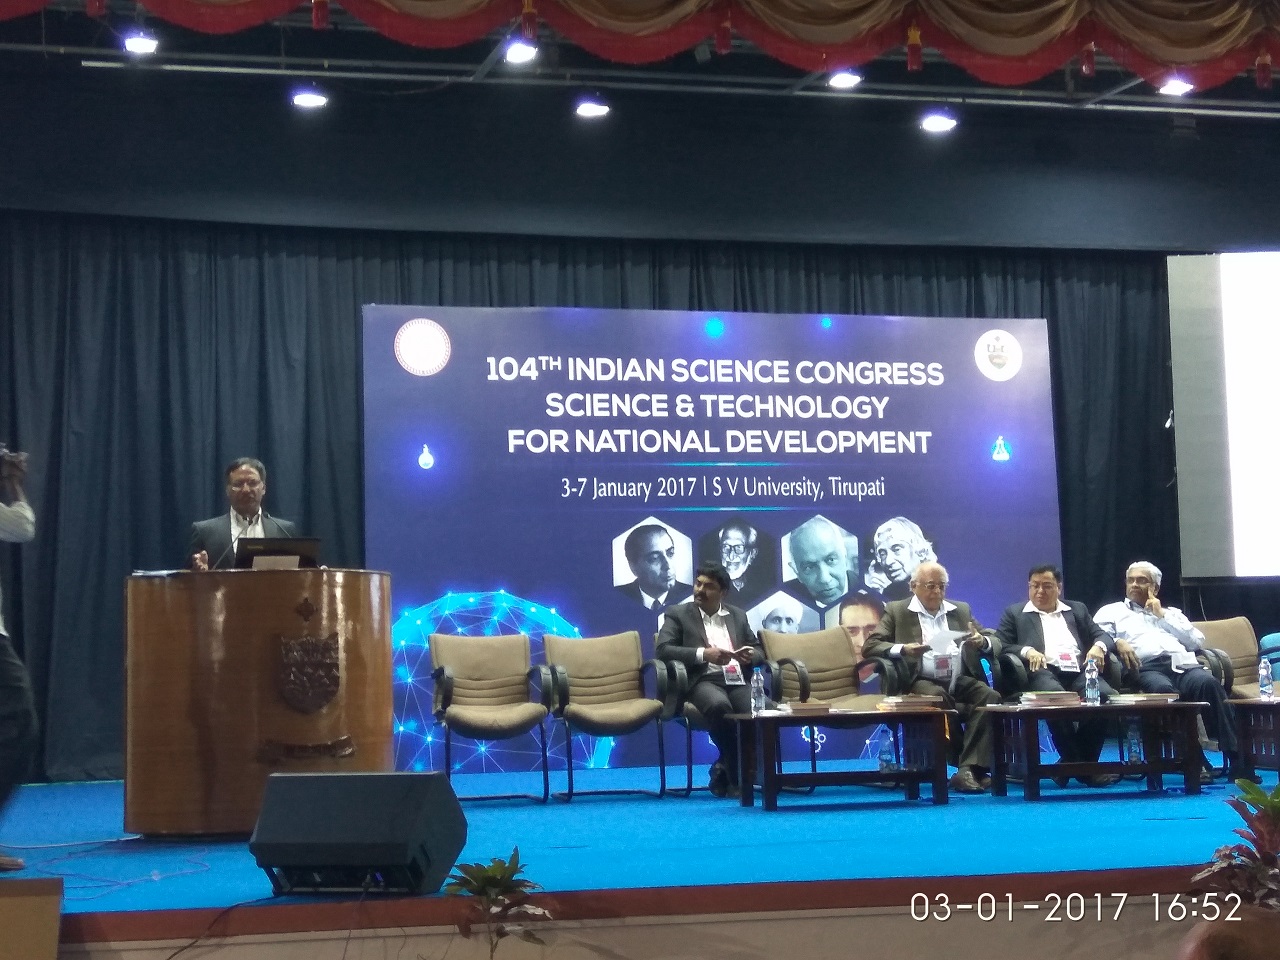 Prof. Ashutosh Sharma, Secretary, DST at panel discussion on Ministry of S&T perspective